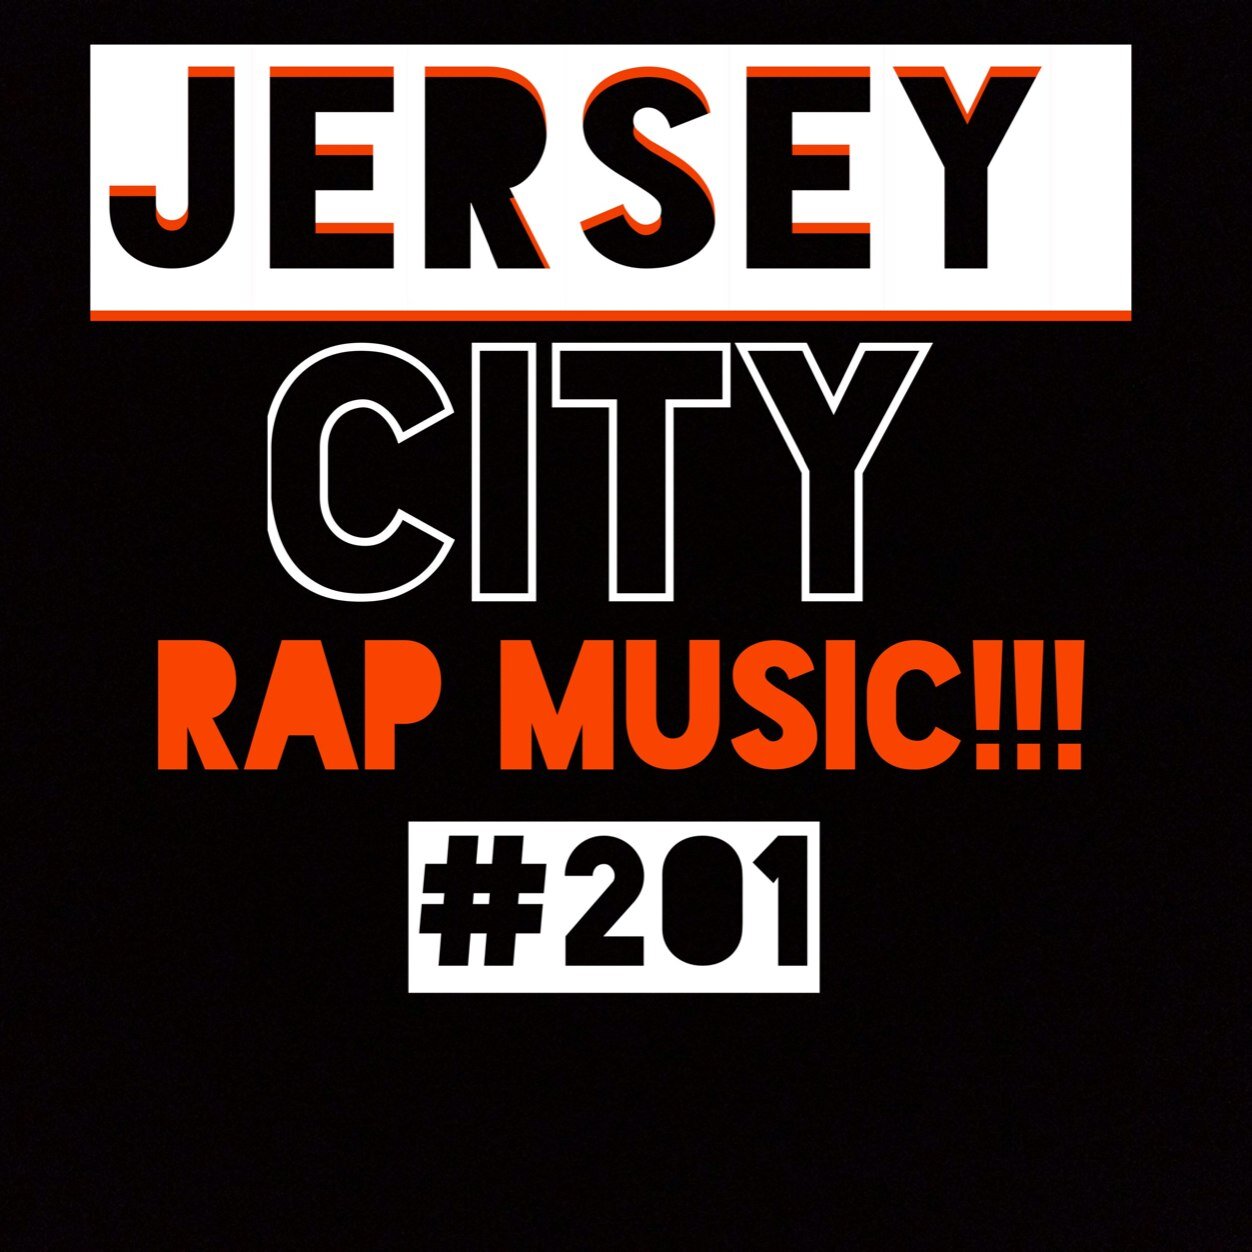 Becoming the #1 Source For The Old and New Hottest Artist in Jersey City, NJ!! Send Songs to JerseyCityHipHop201@aol.com! Not all will make The Cut!!